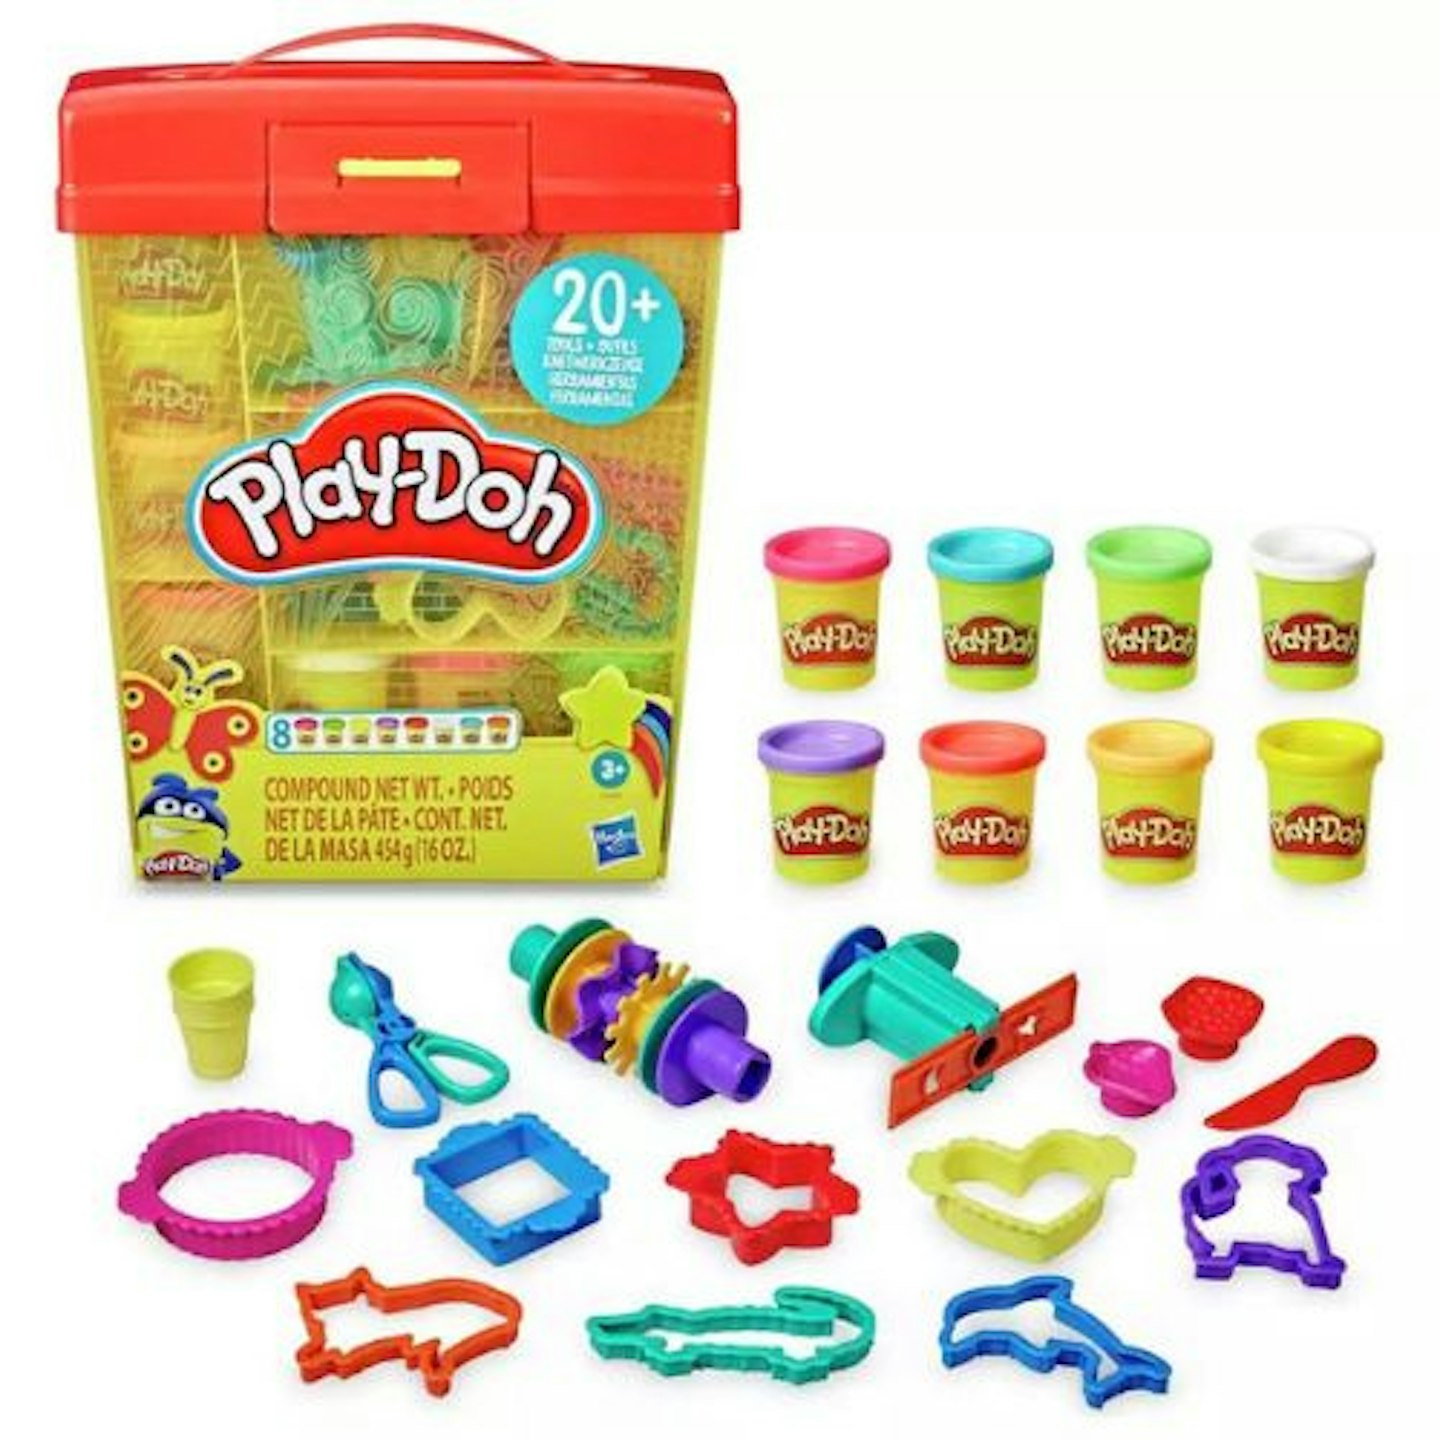 Play-Doh-Tools-and-Storage